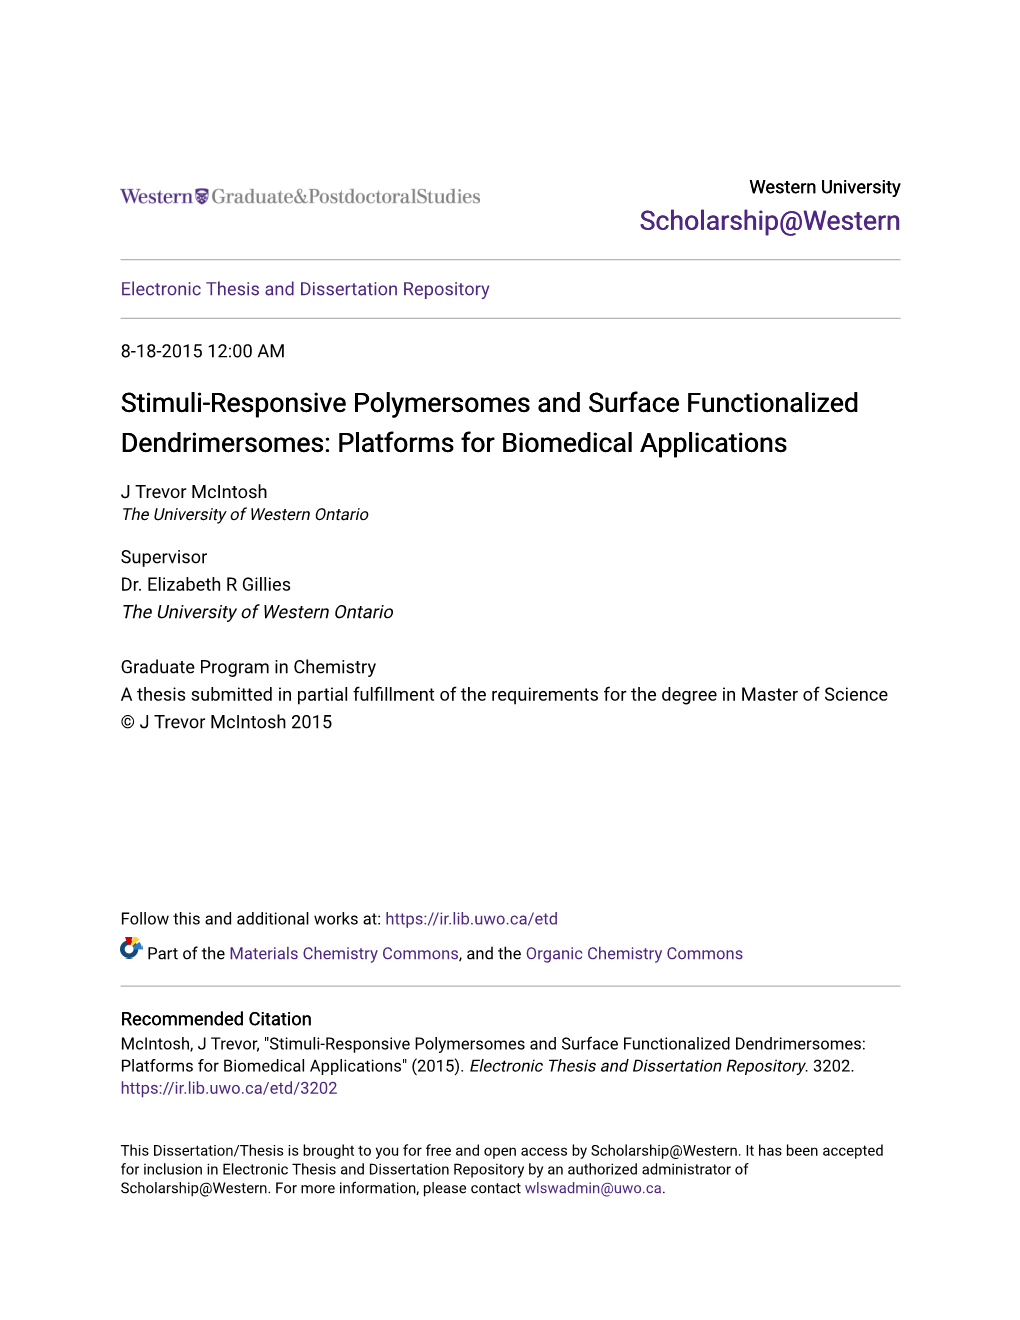 Stimuli-Responsive Polymersomes and Surface Functionalized Dendrimersomes: Platforms for Biomedical Applications